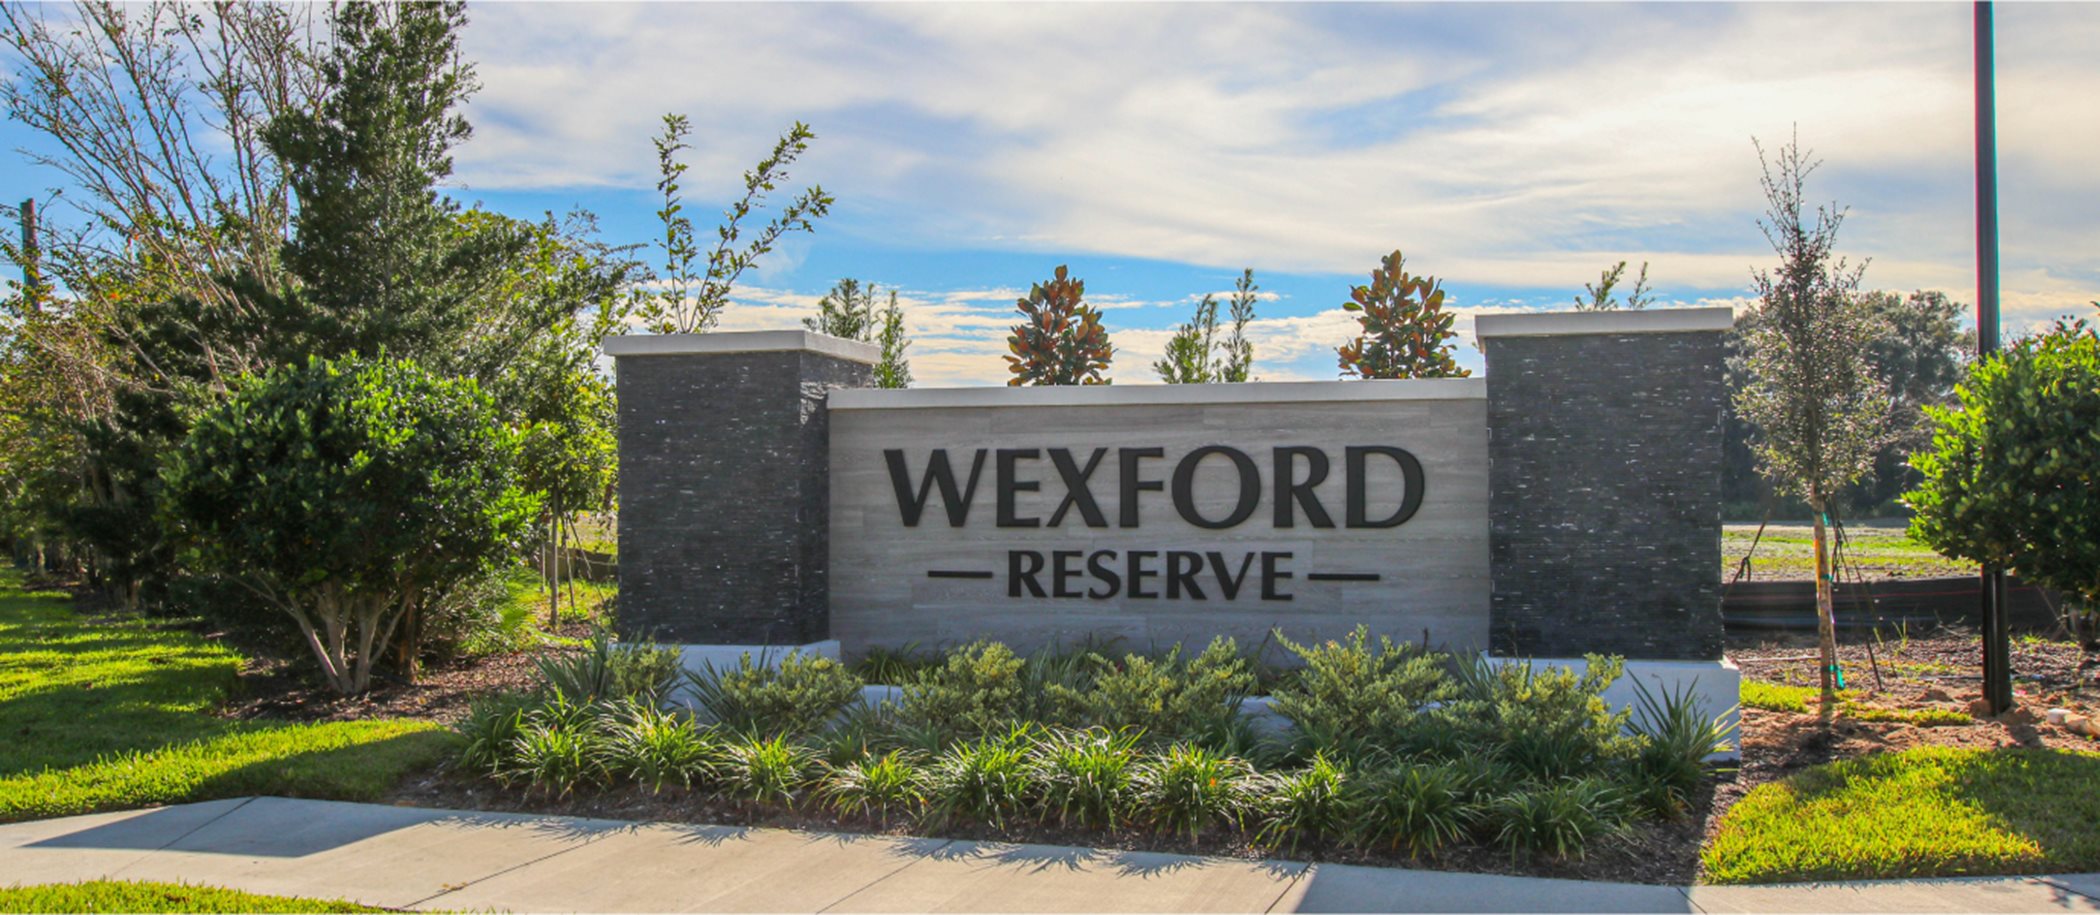 Wexford Reserve monument